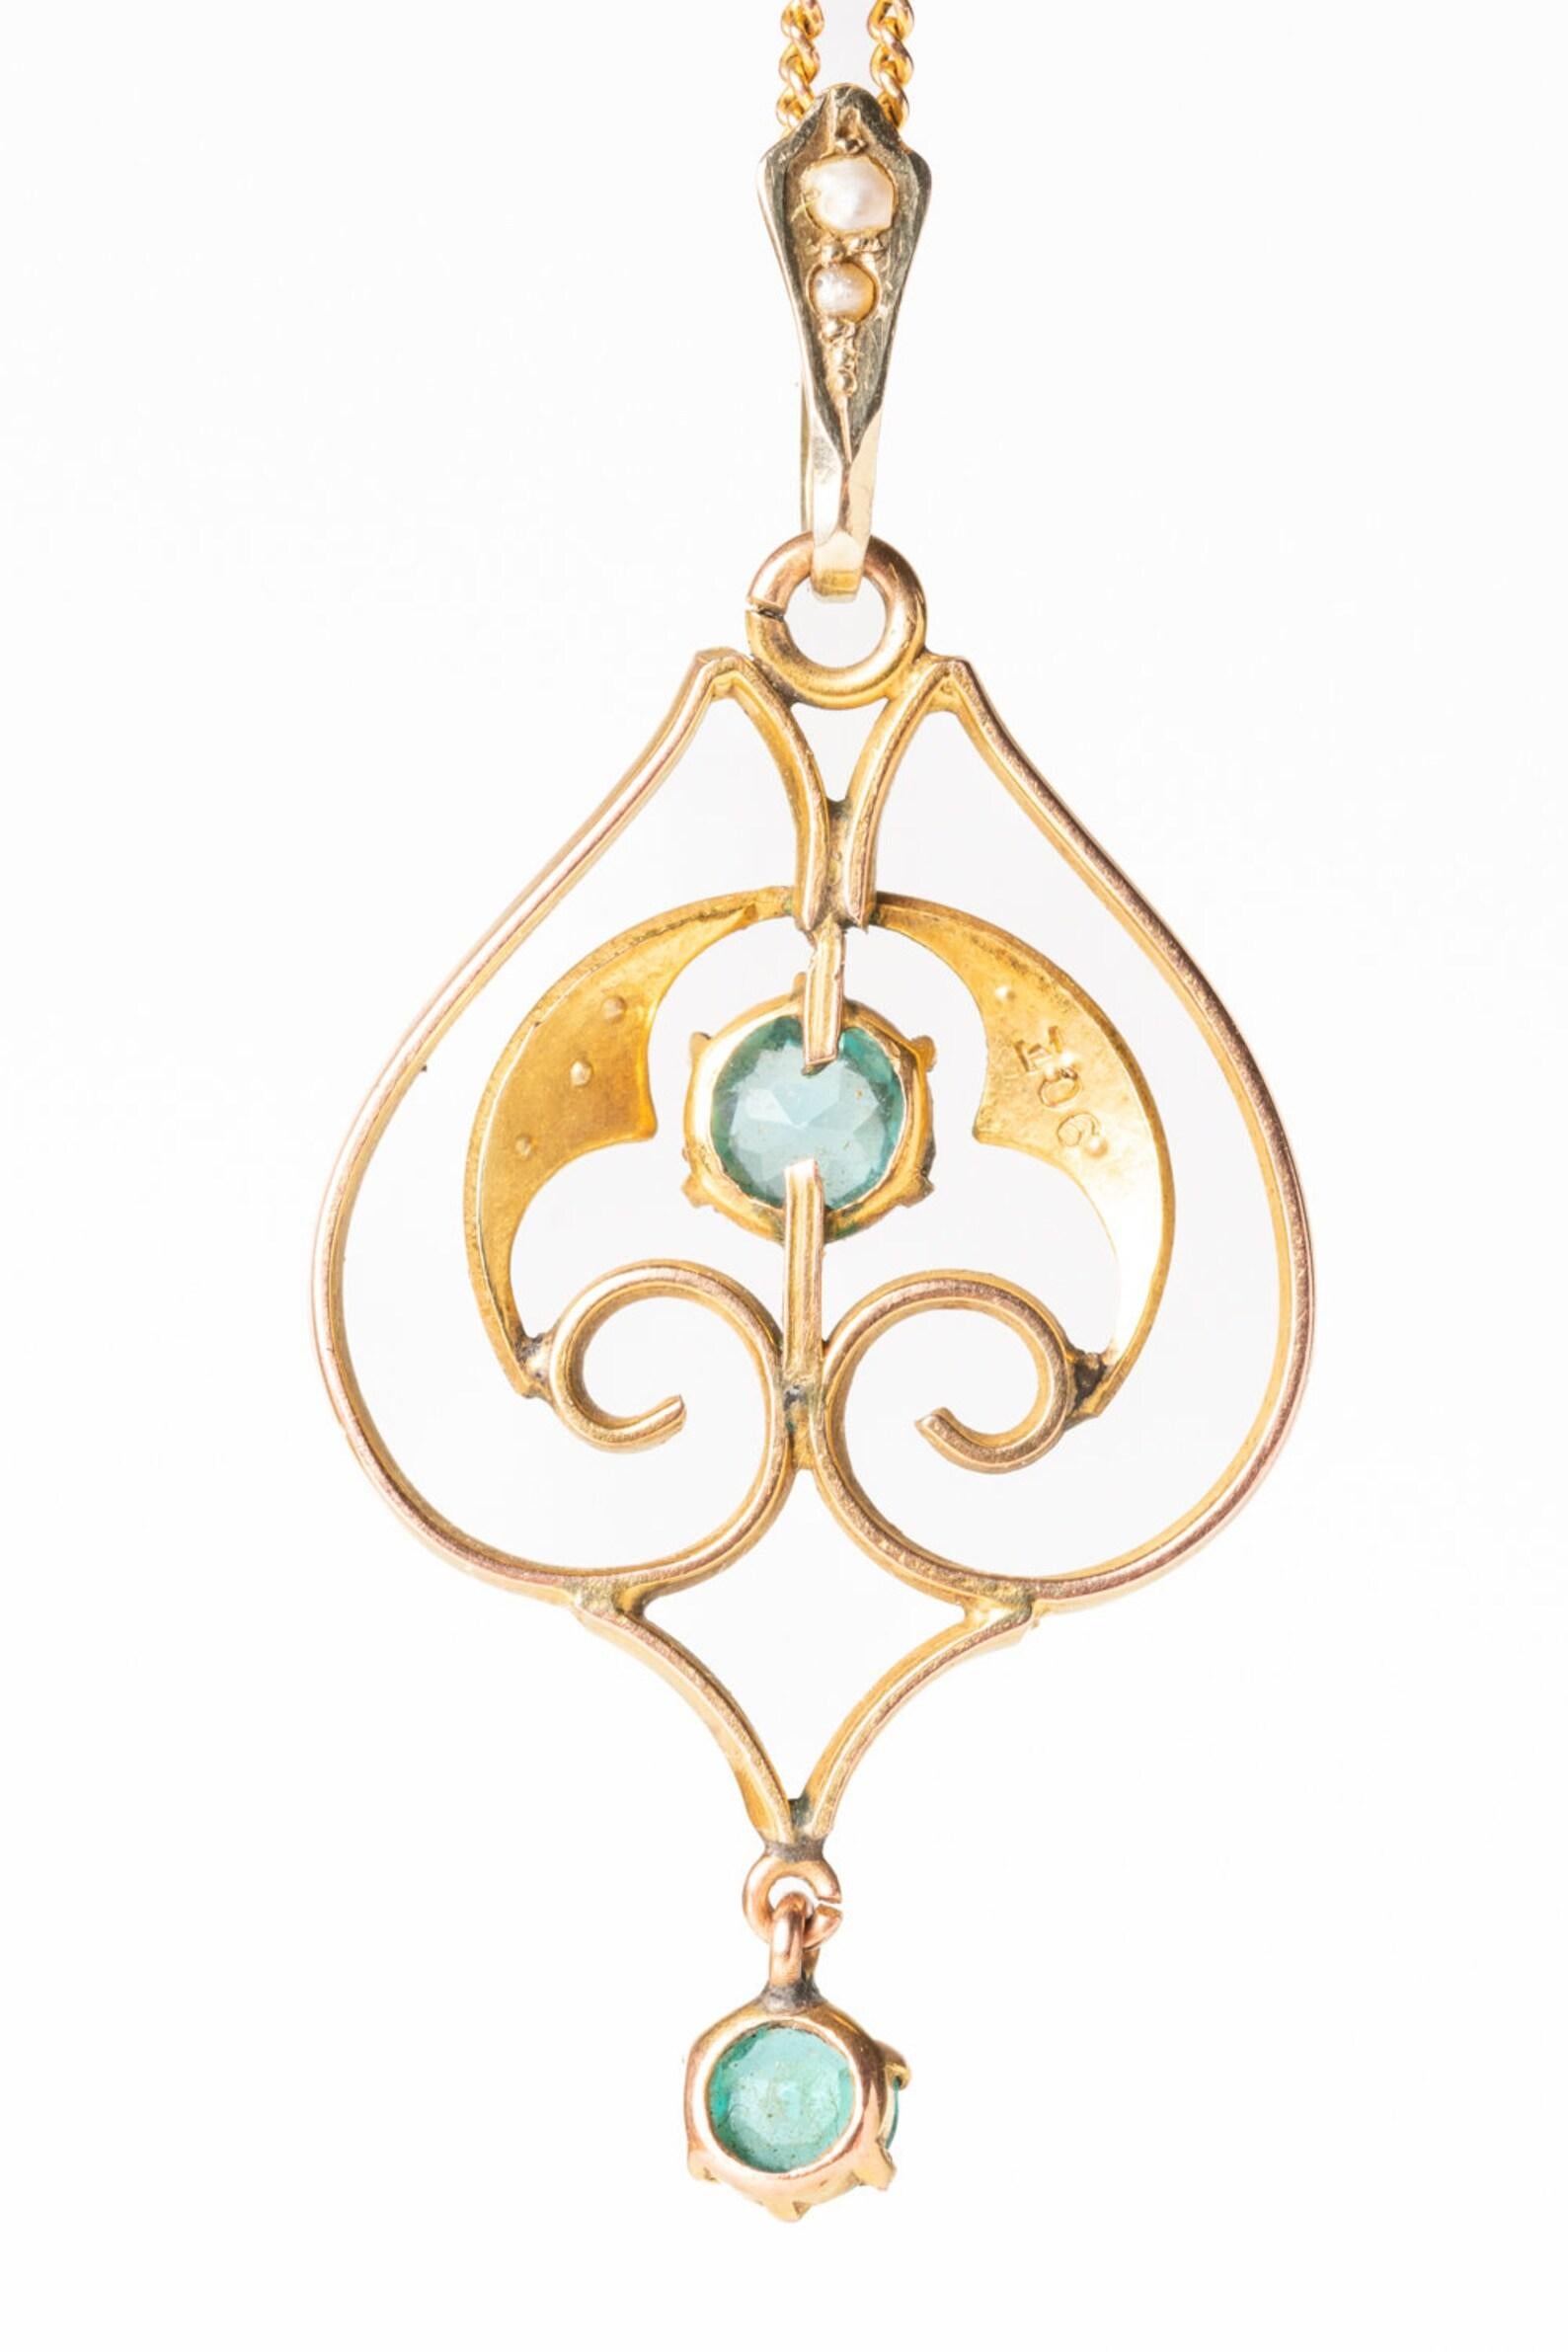 A beautiful Art Nouveau lavalier 9ct gold pendant decorated with two round topaz stones together with six lustre seed pearls. The pendant is designed in a typical for Art Nouveau style.

The Blue Topaz symbolizes a channel of your inner wisdom and